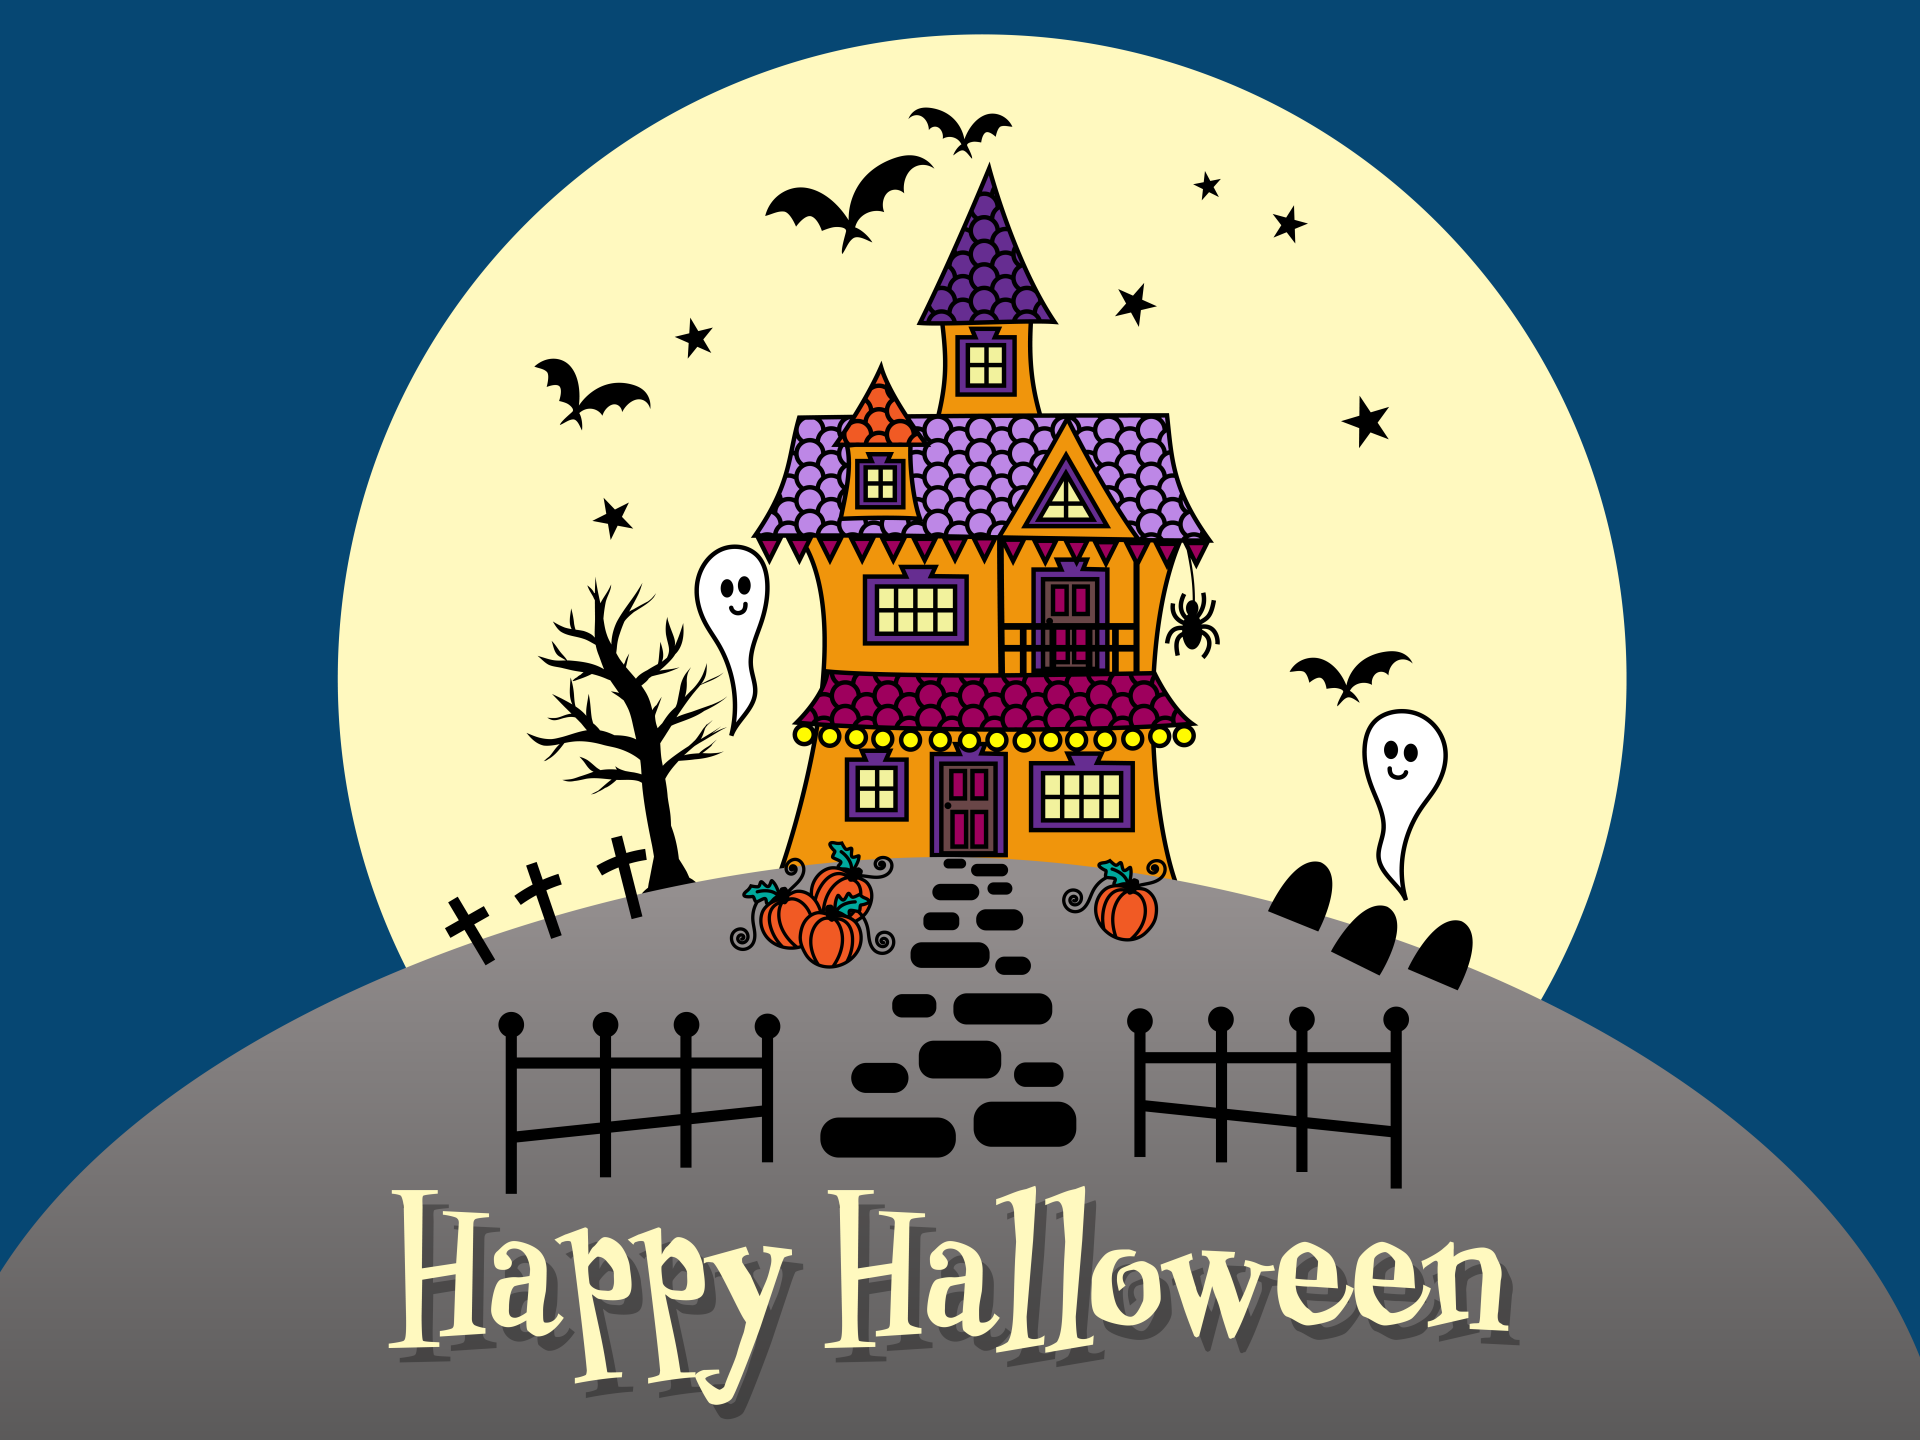 Halloween haunted house with ghosts, bats and gravestones illustration